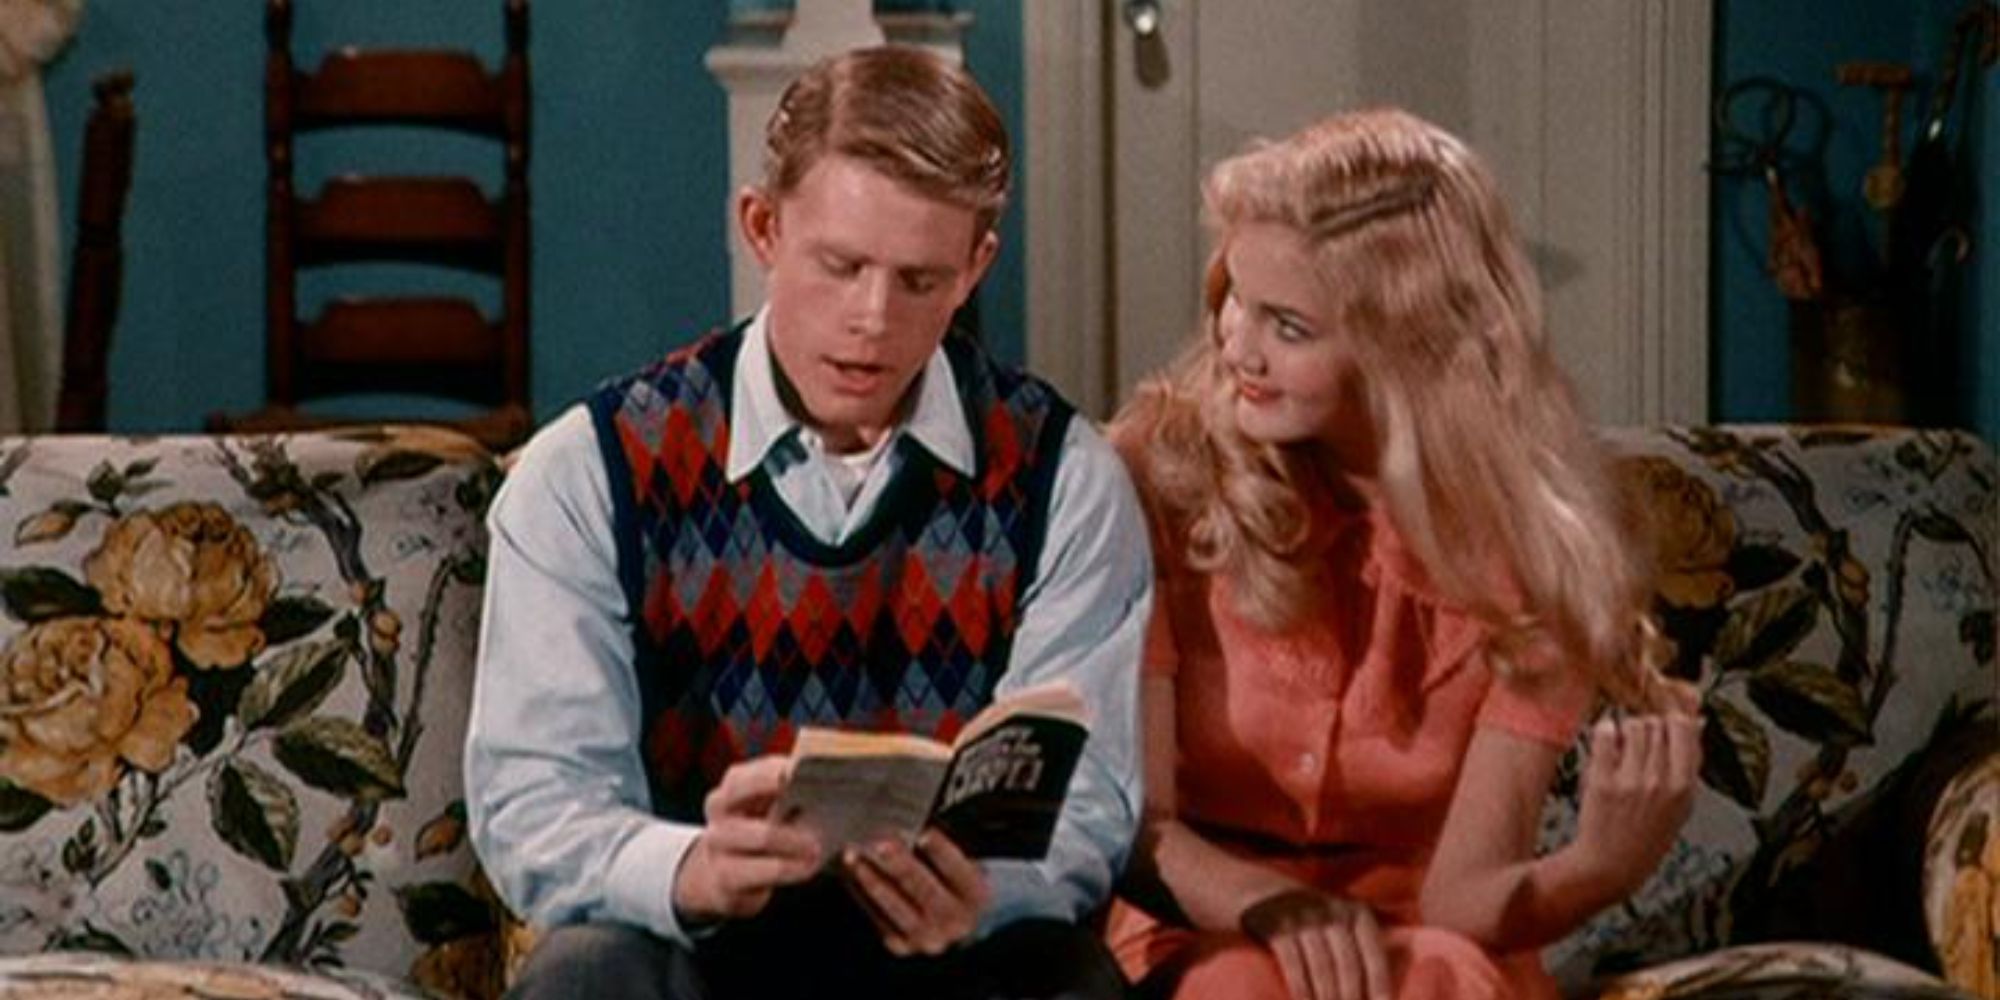 Richie Cunningham (Ron Howard) on a couch reading with Mary Lou Milligan (Kathy O'Dare) ​​​​​​​in Happy Days